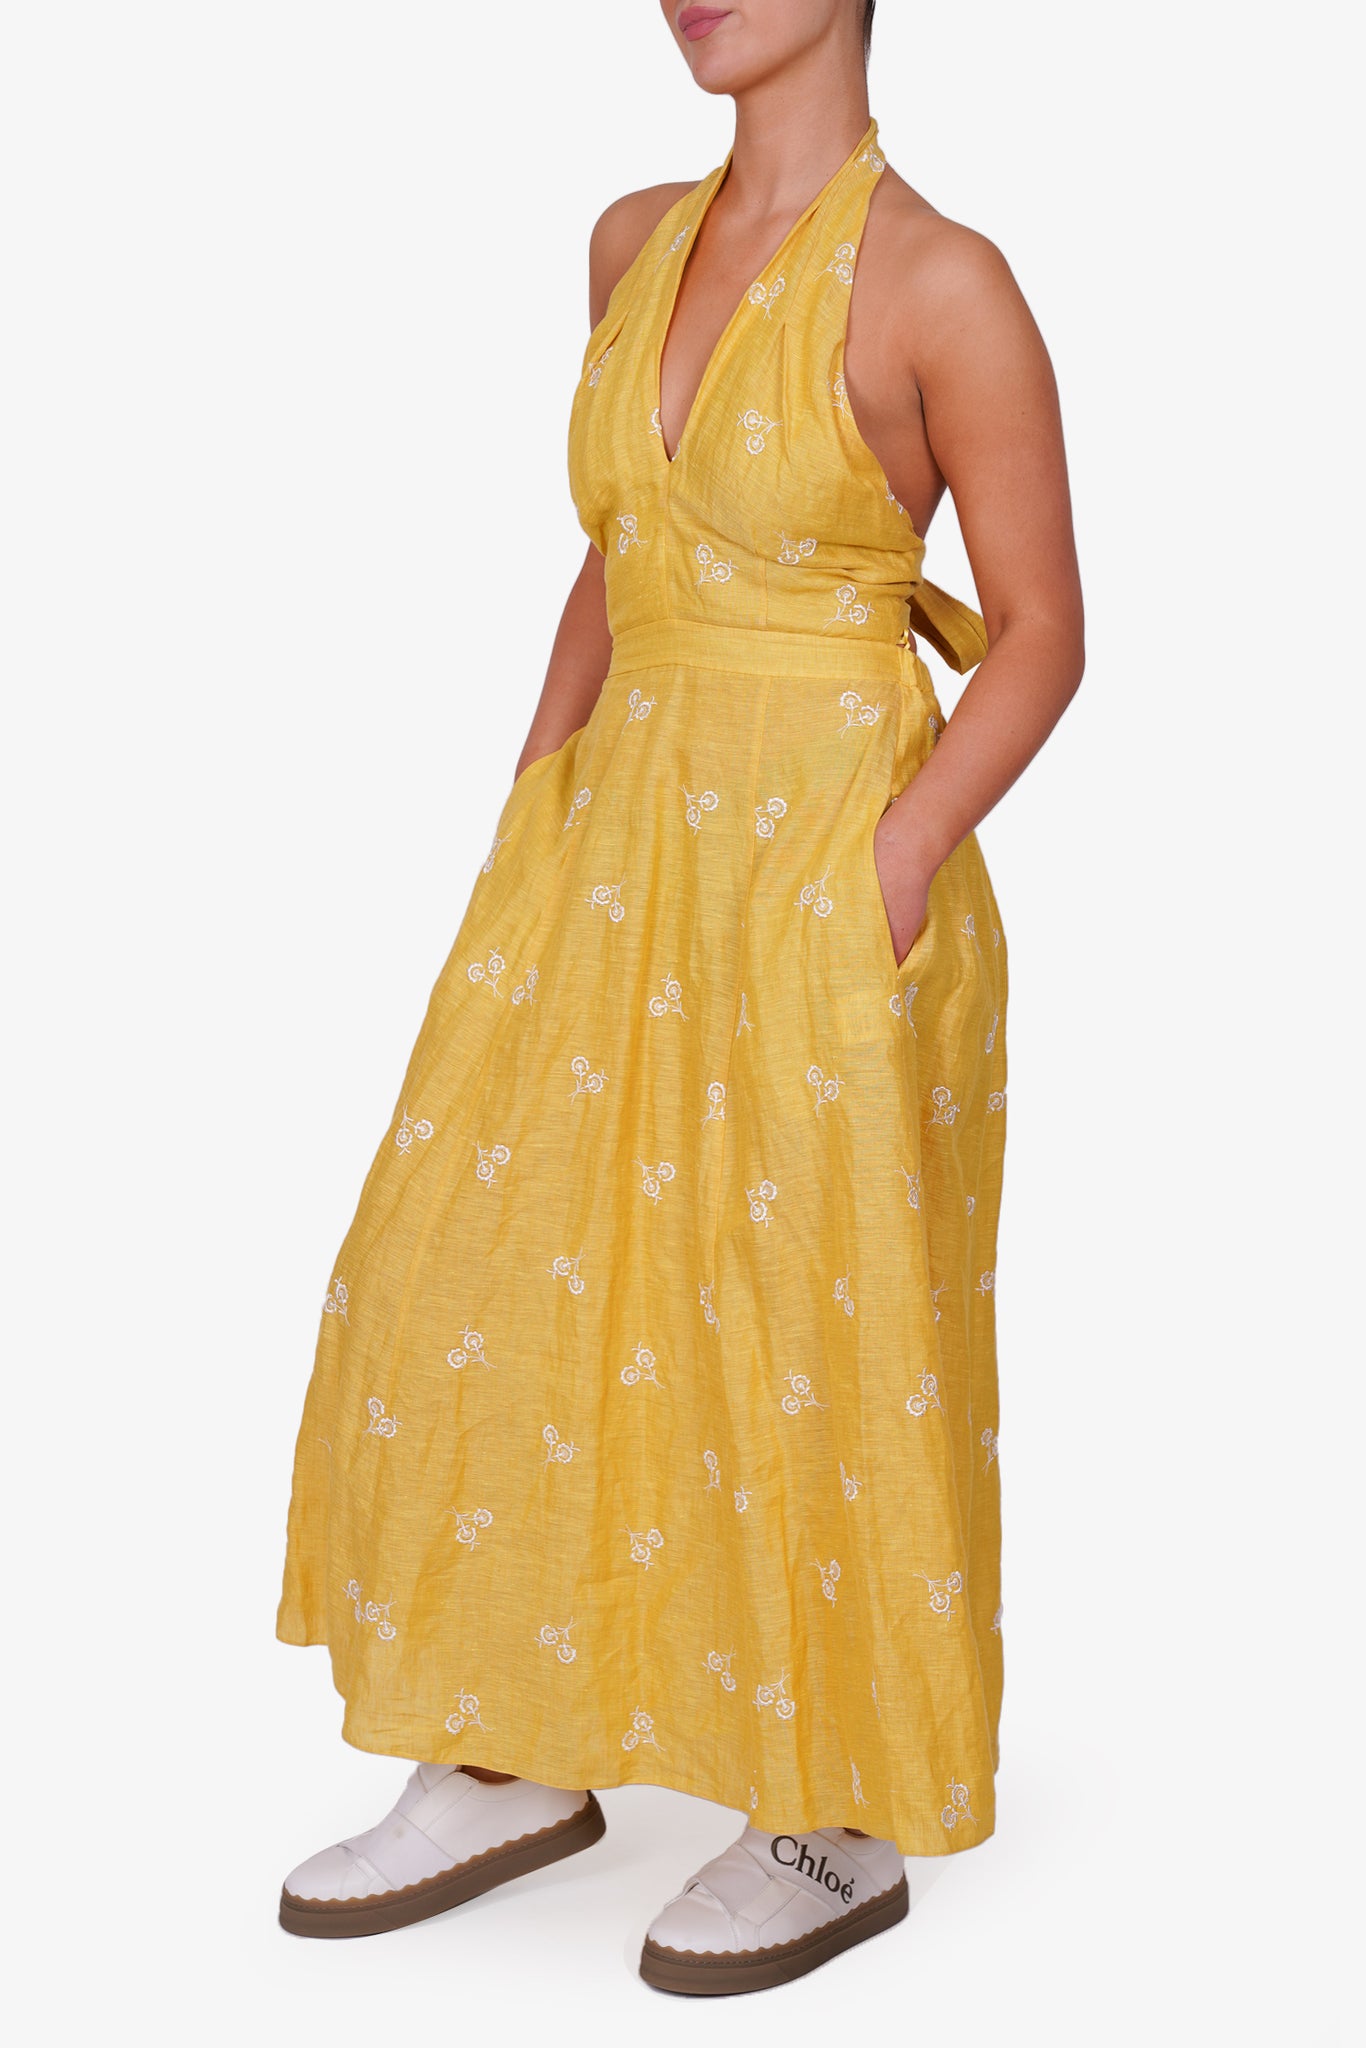 Erdem Yellow/White Floral Embroidered Halterneck Maxi Dress Size 6